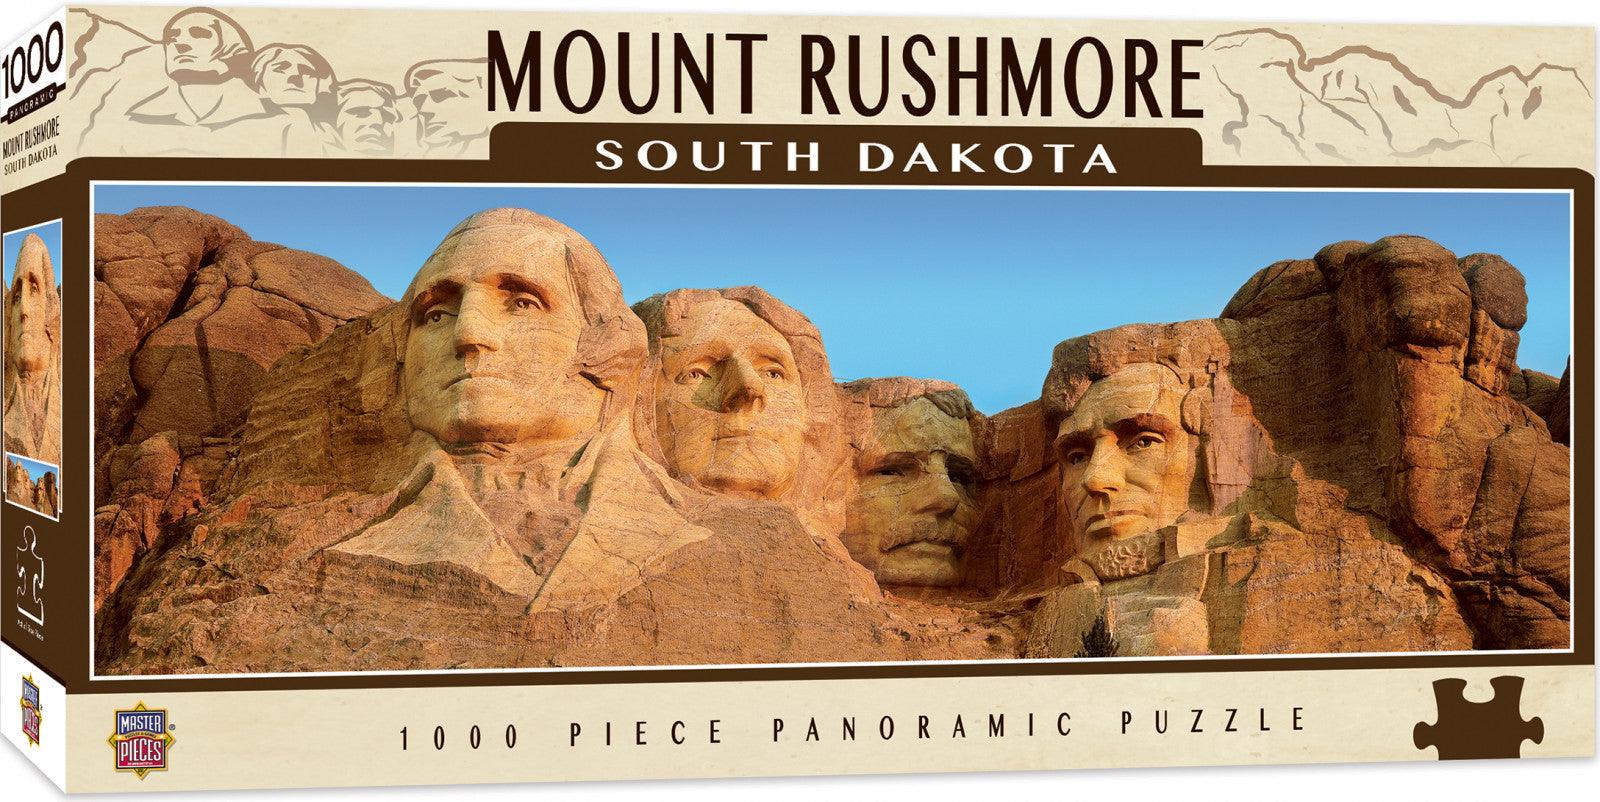 VR-45028 Masterpieces Puzzle City Panoramic Mount Rushmore Puzzle 1,000 pieces - Masterpieces - Titan Pop Culture